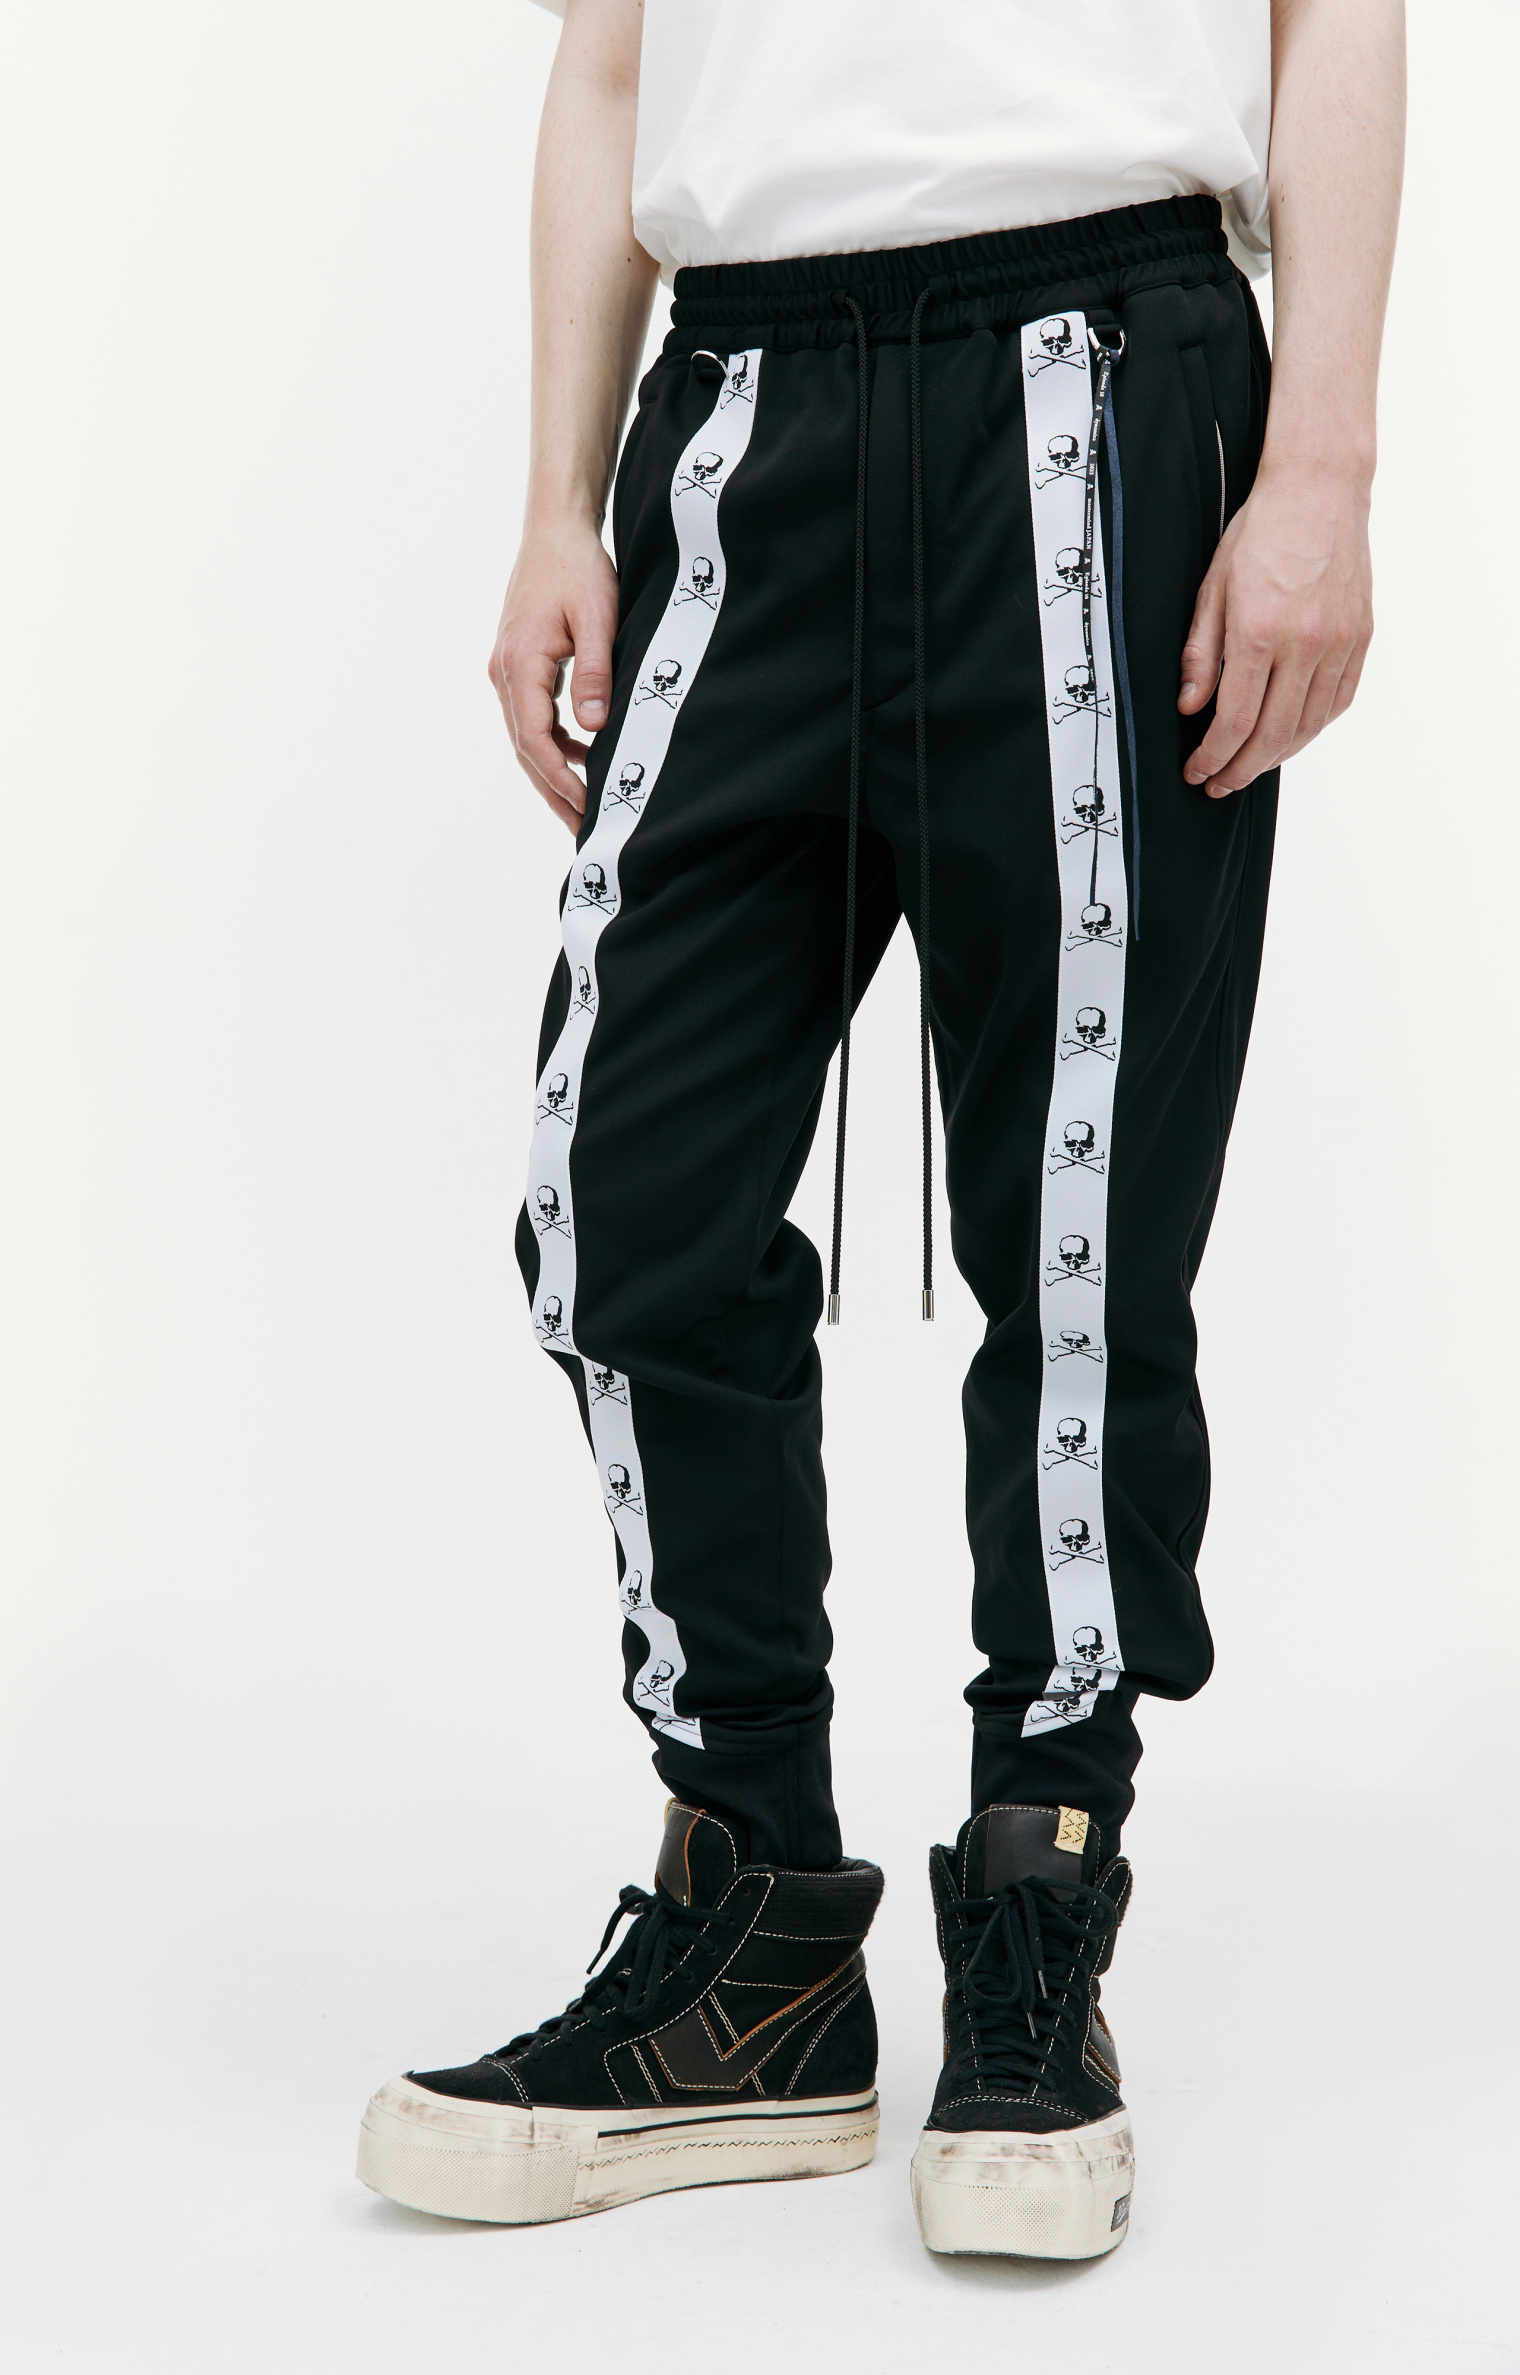 Mastermind WORLD Black trousers with stripes